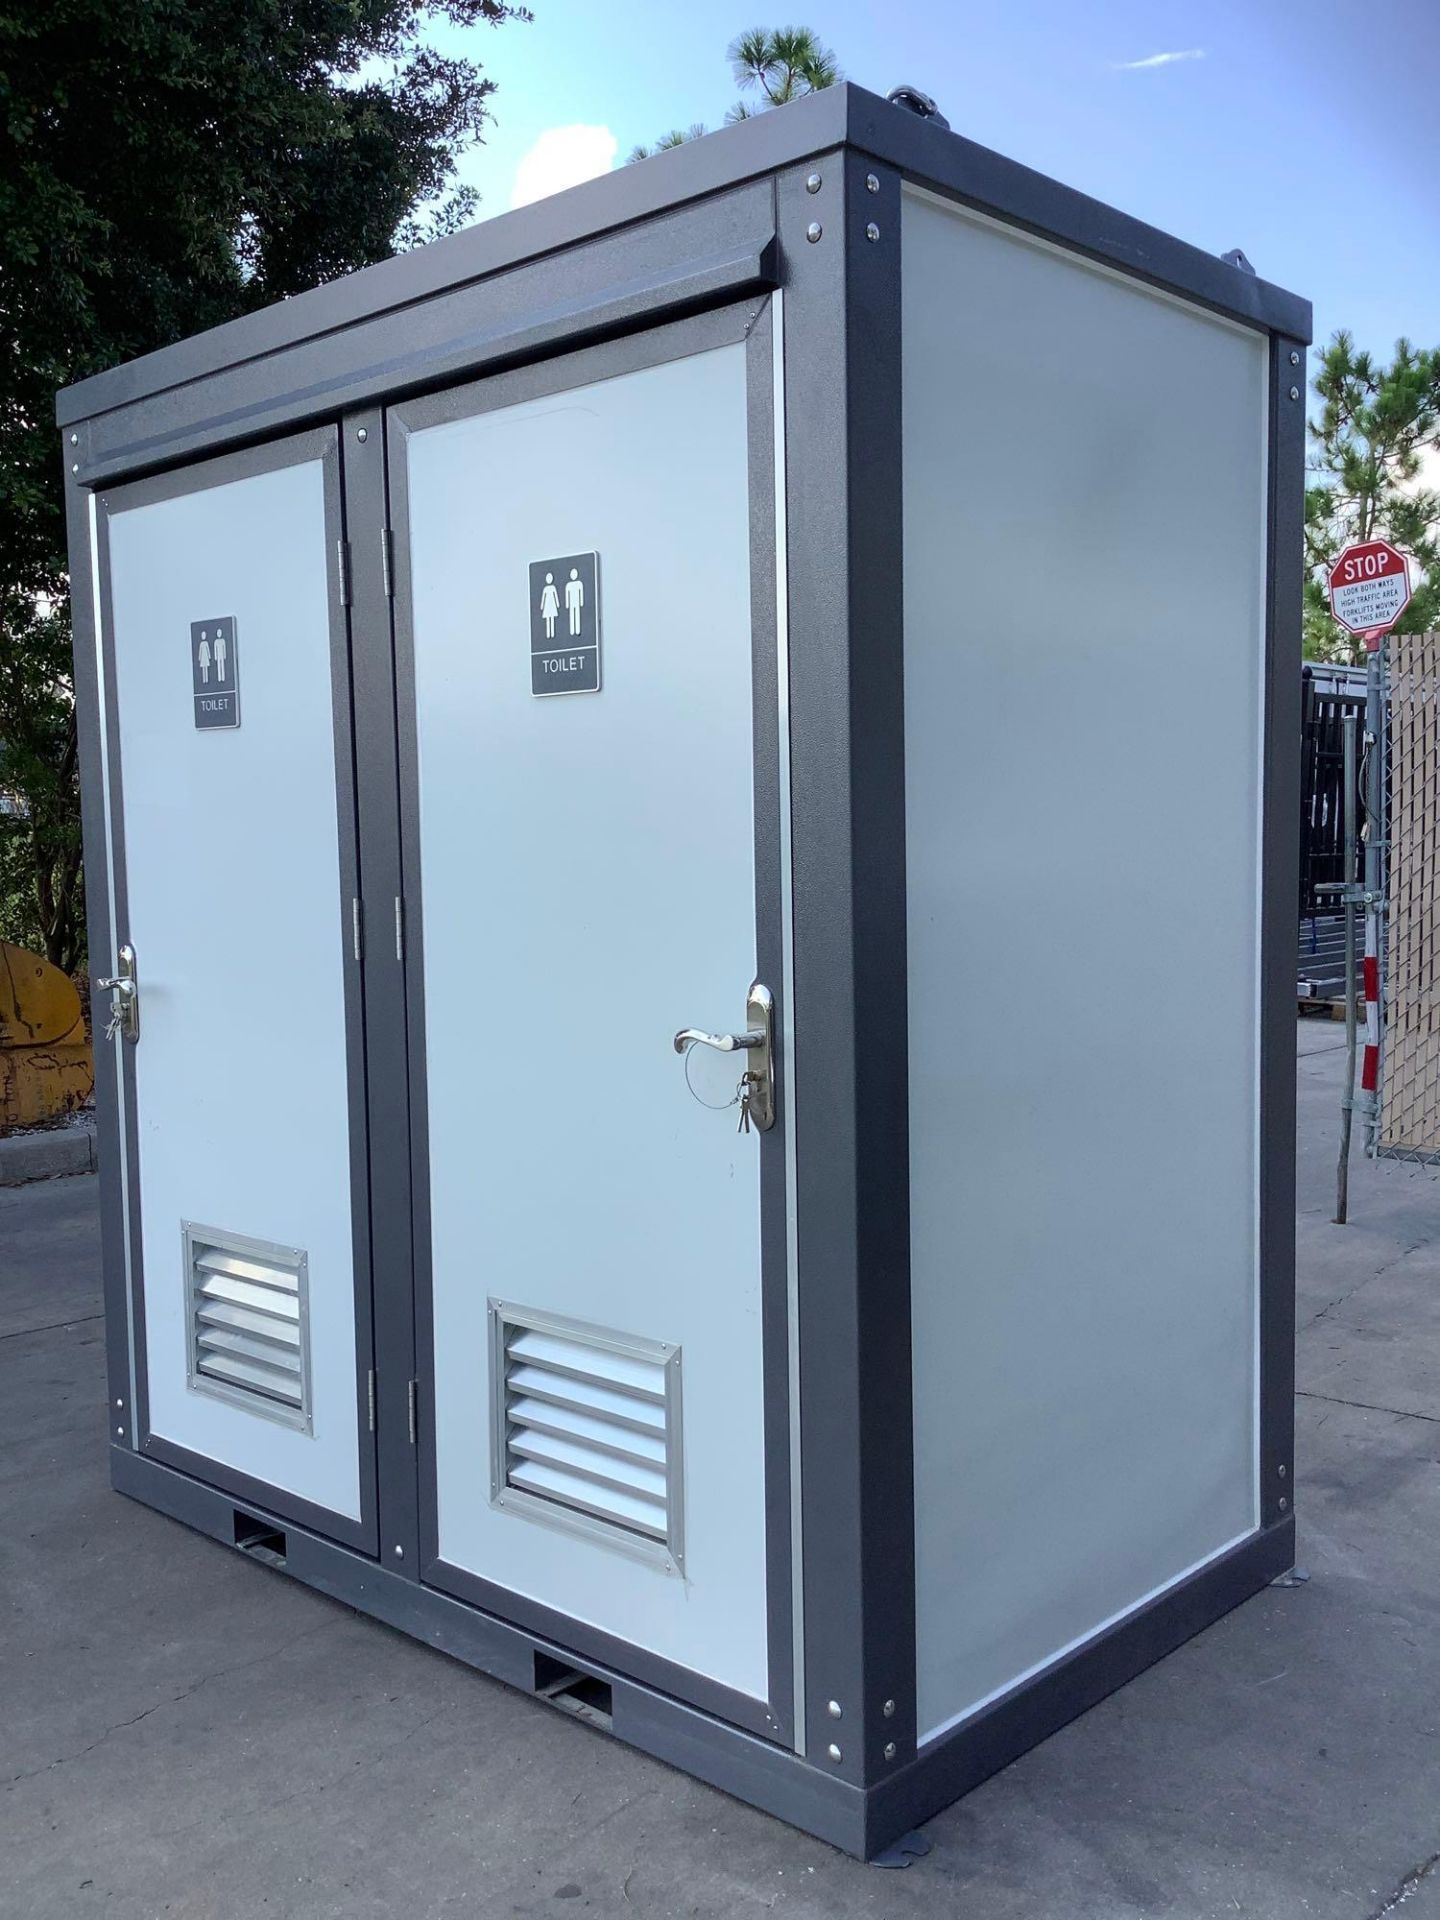 UNUSED PORTABLE DOUBLE BATHROOM UNIT, 2 STALLS, ELECTRIC & PLUMBING HOOK UP WITH EXTERIOR PLUMBING C - Image 8 of 13